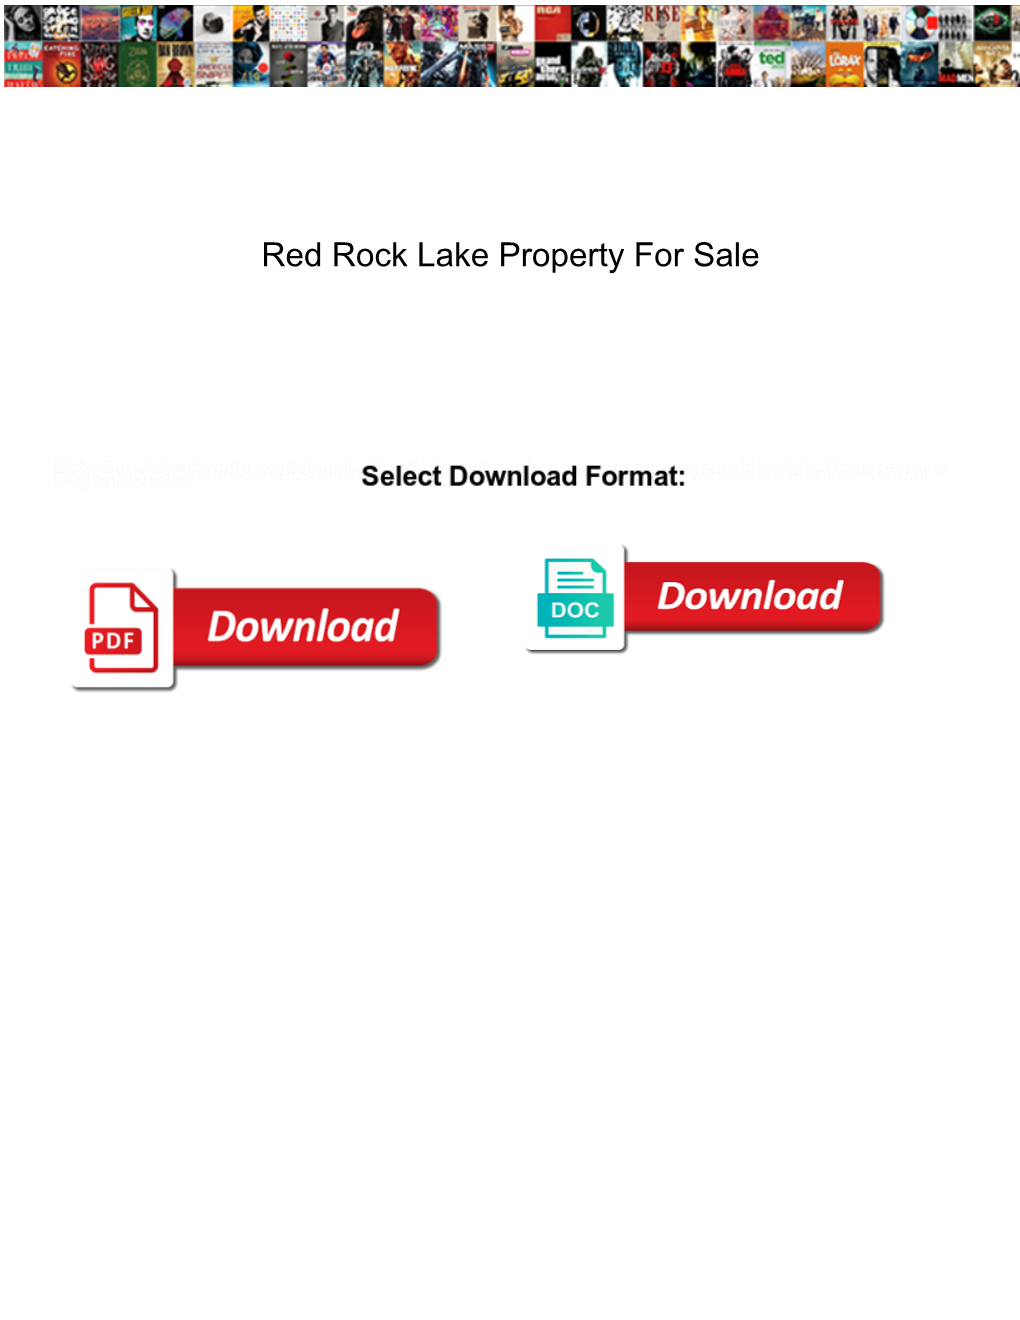 Red Rock Lake Property for Sale